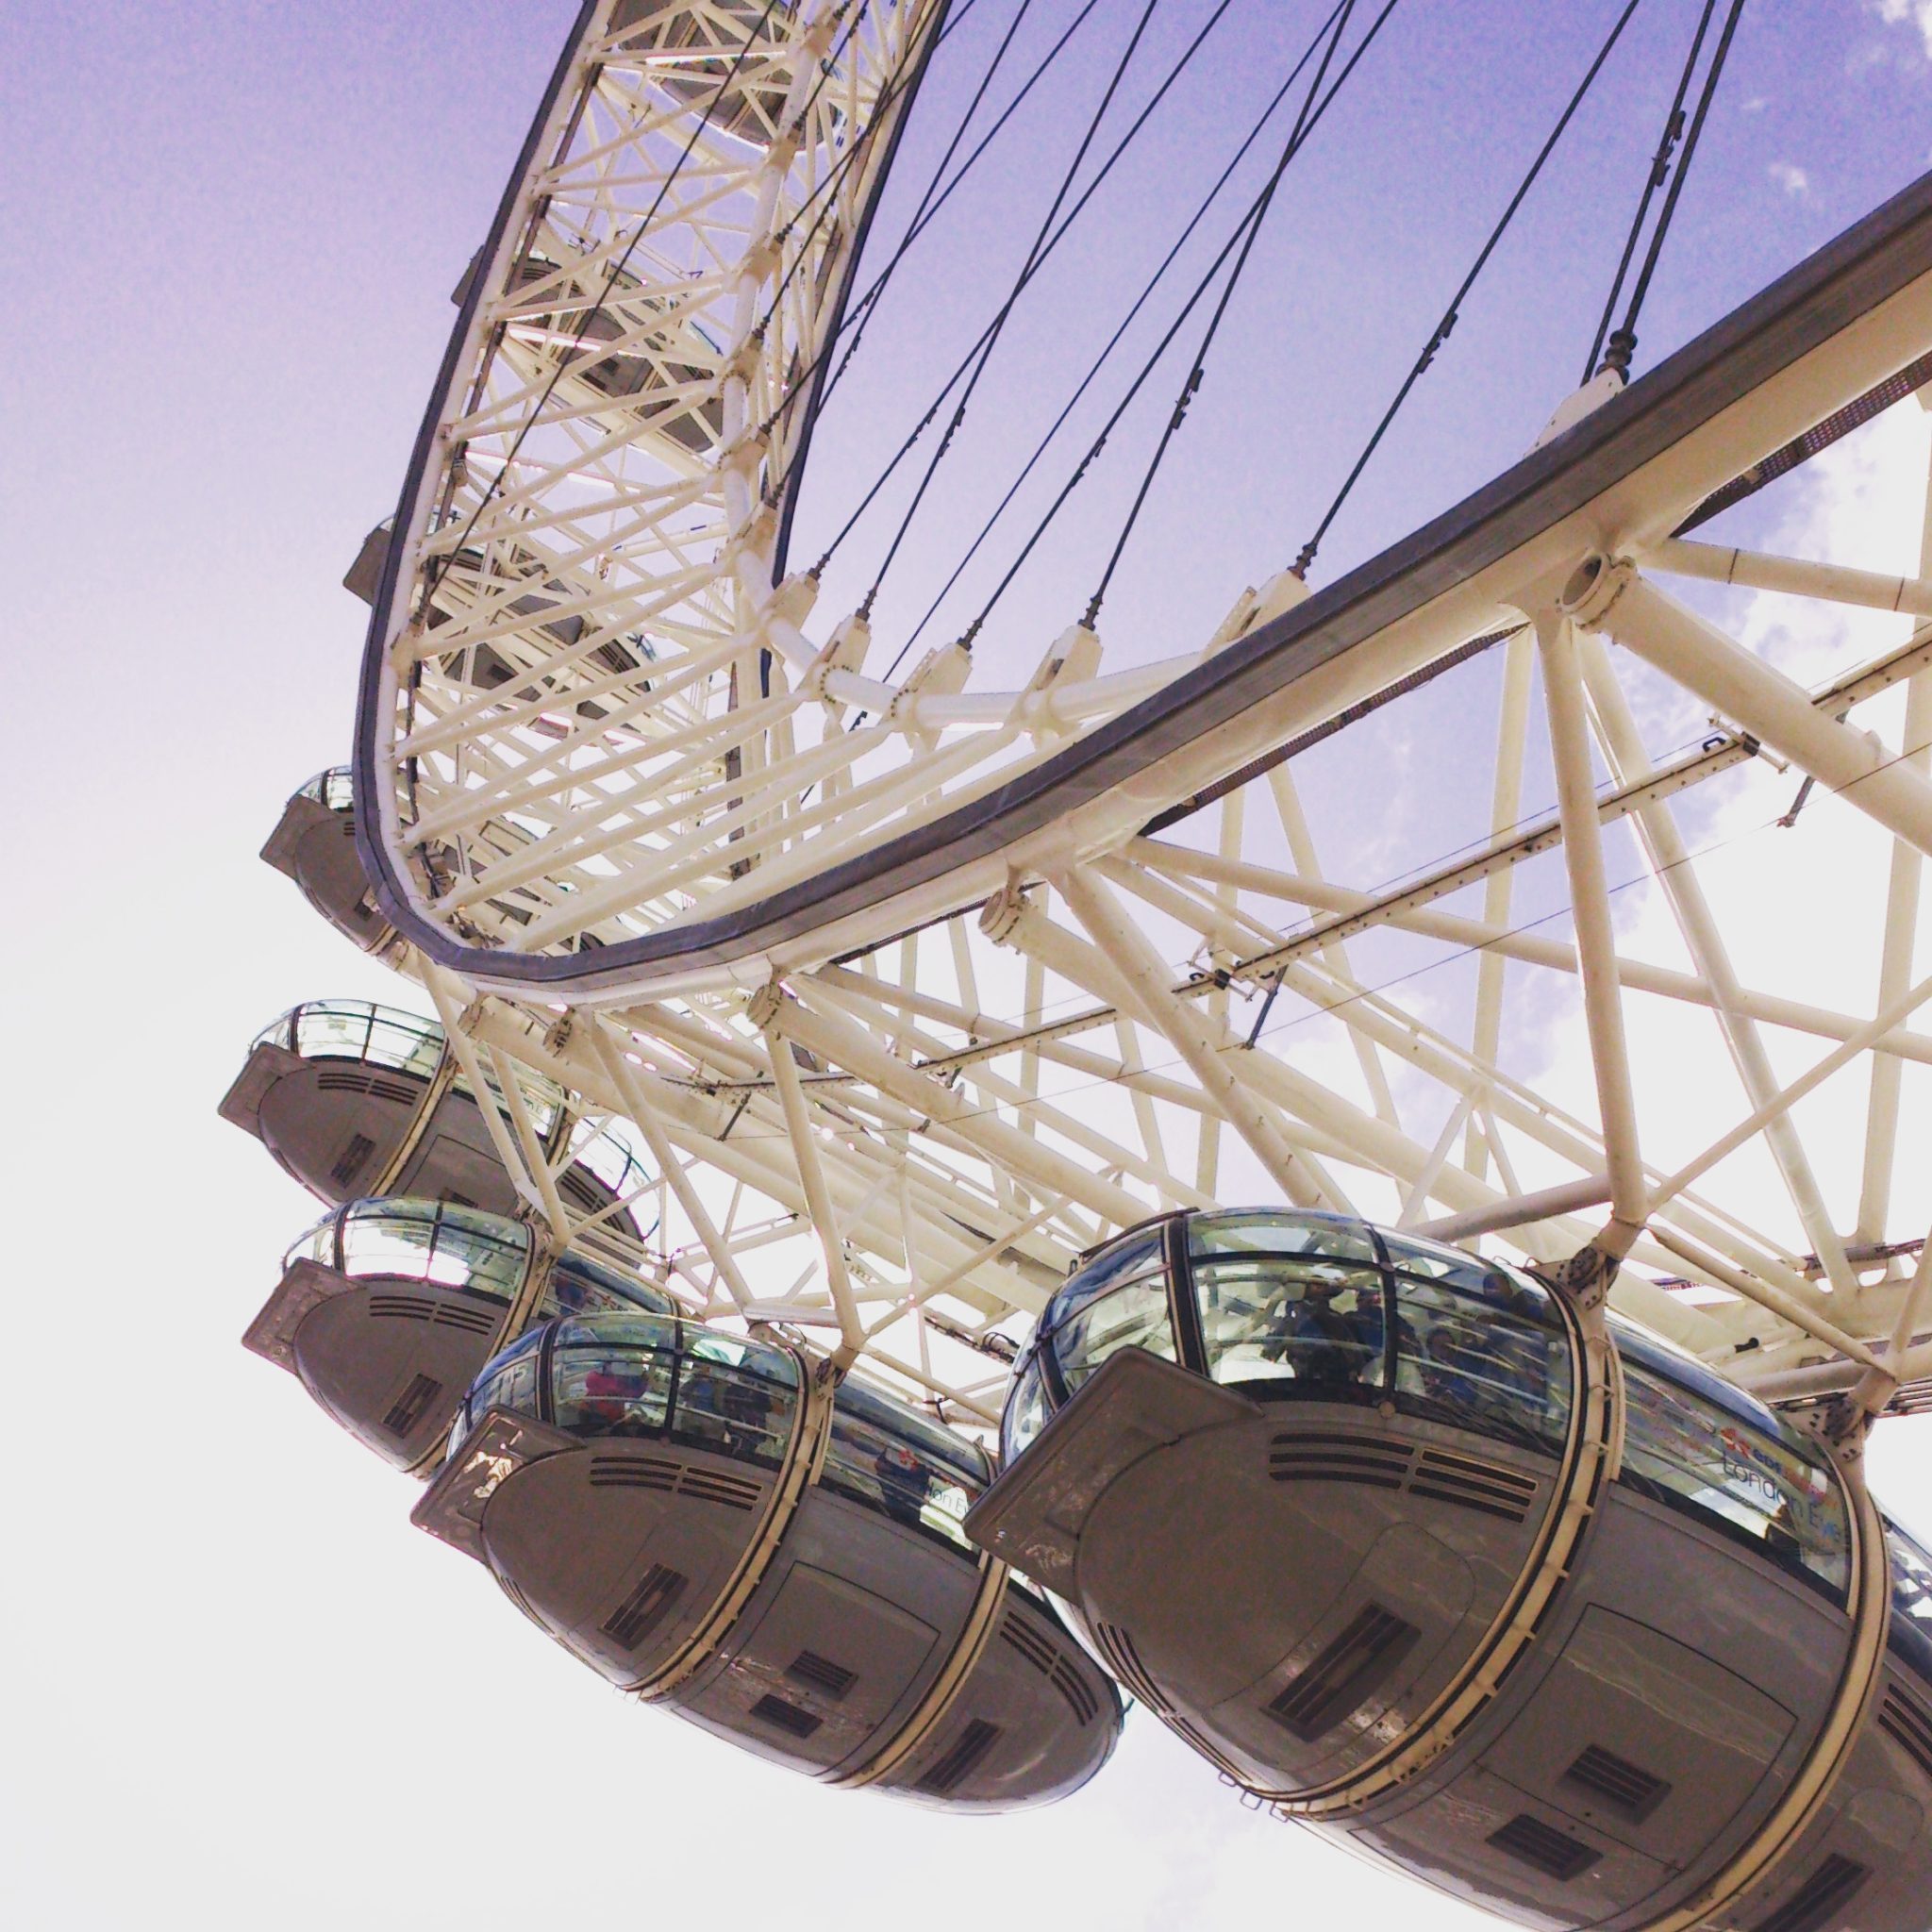 Top 10 Attractions in London - The London Eye